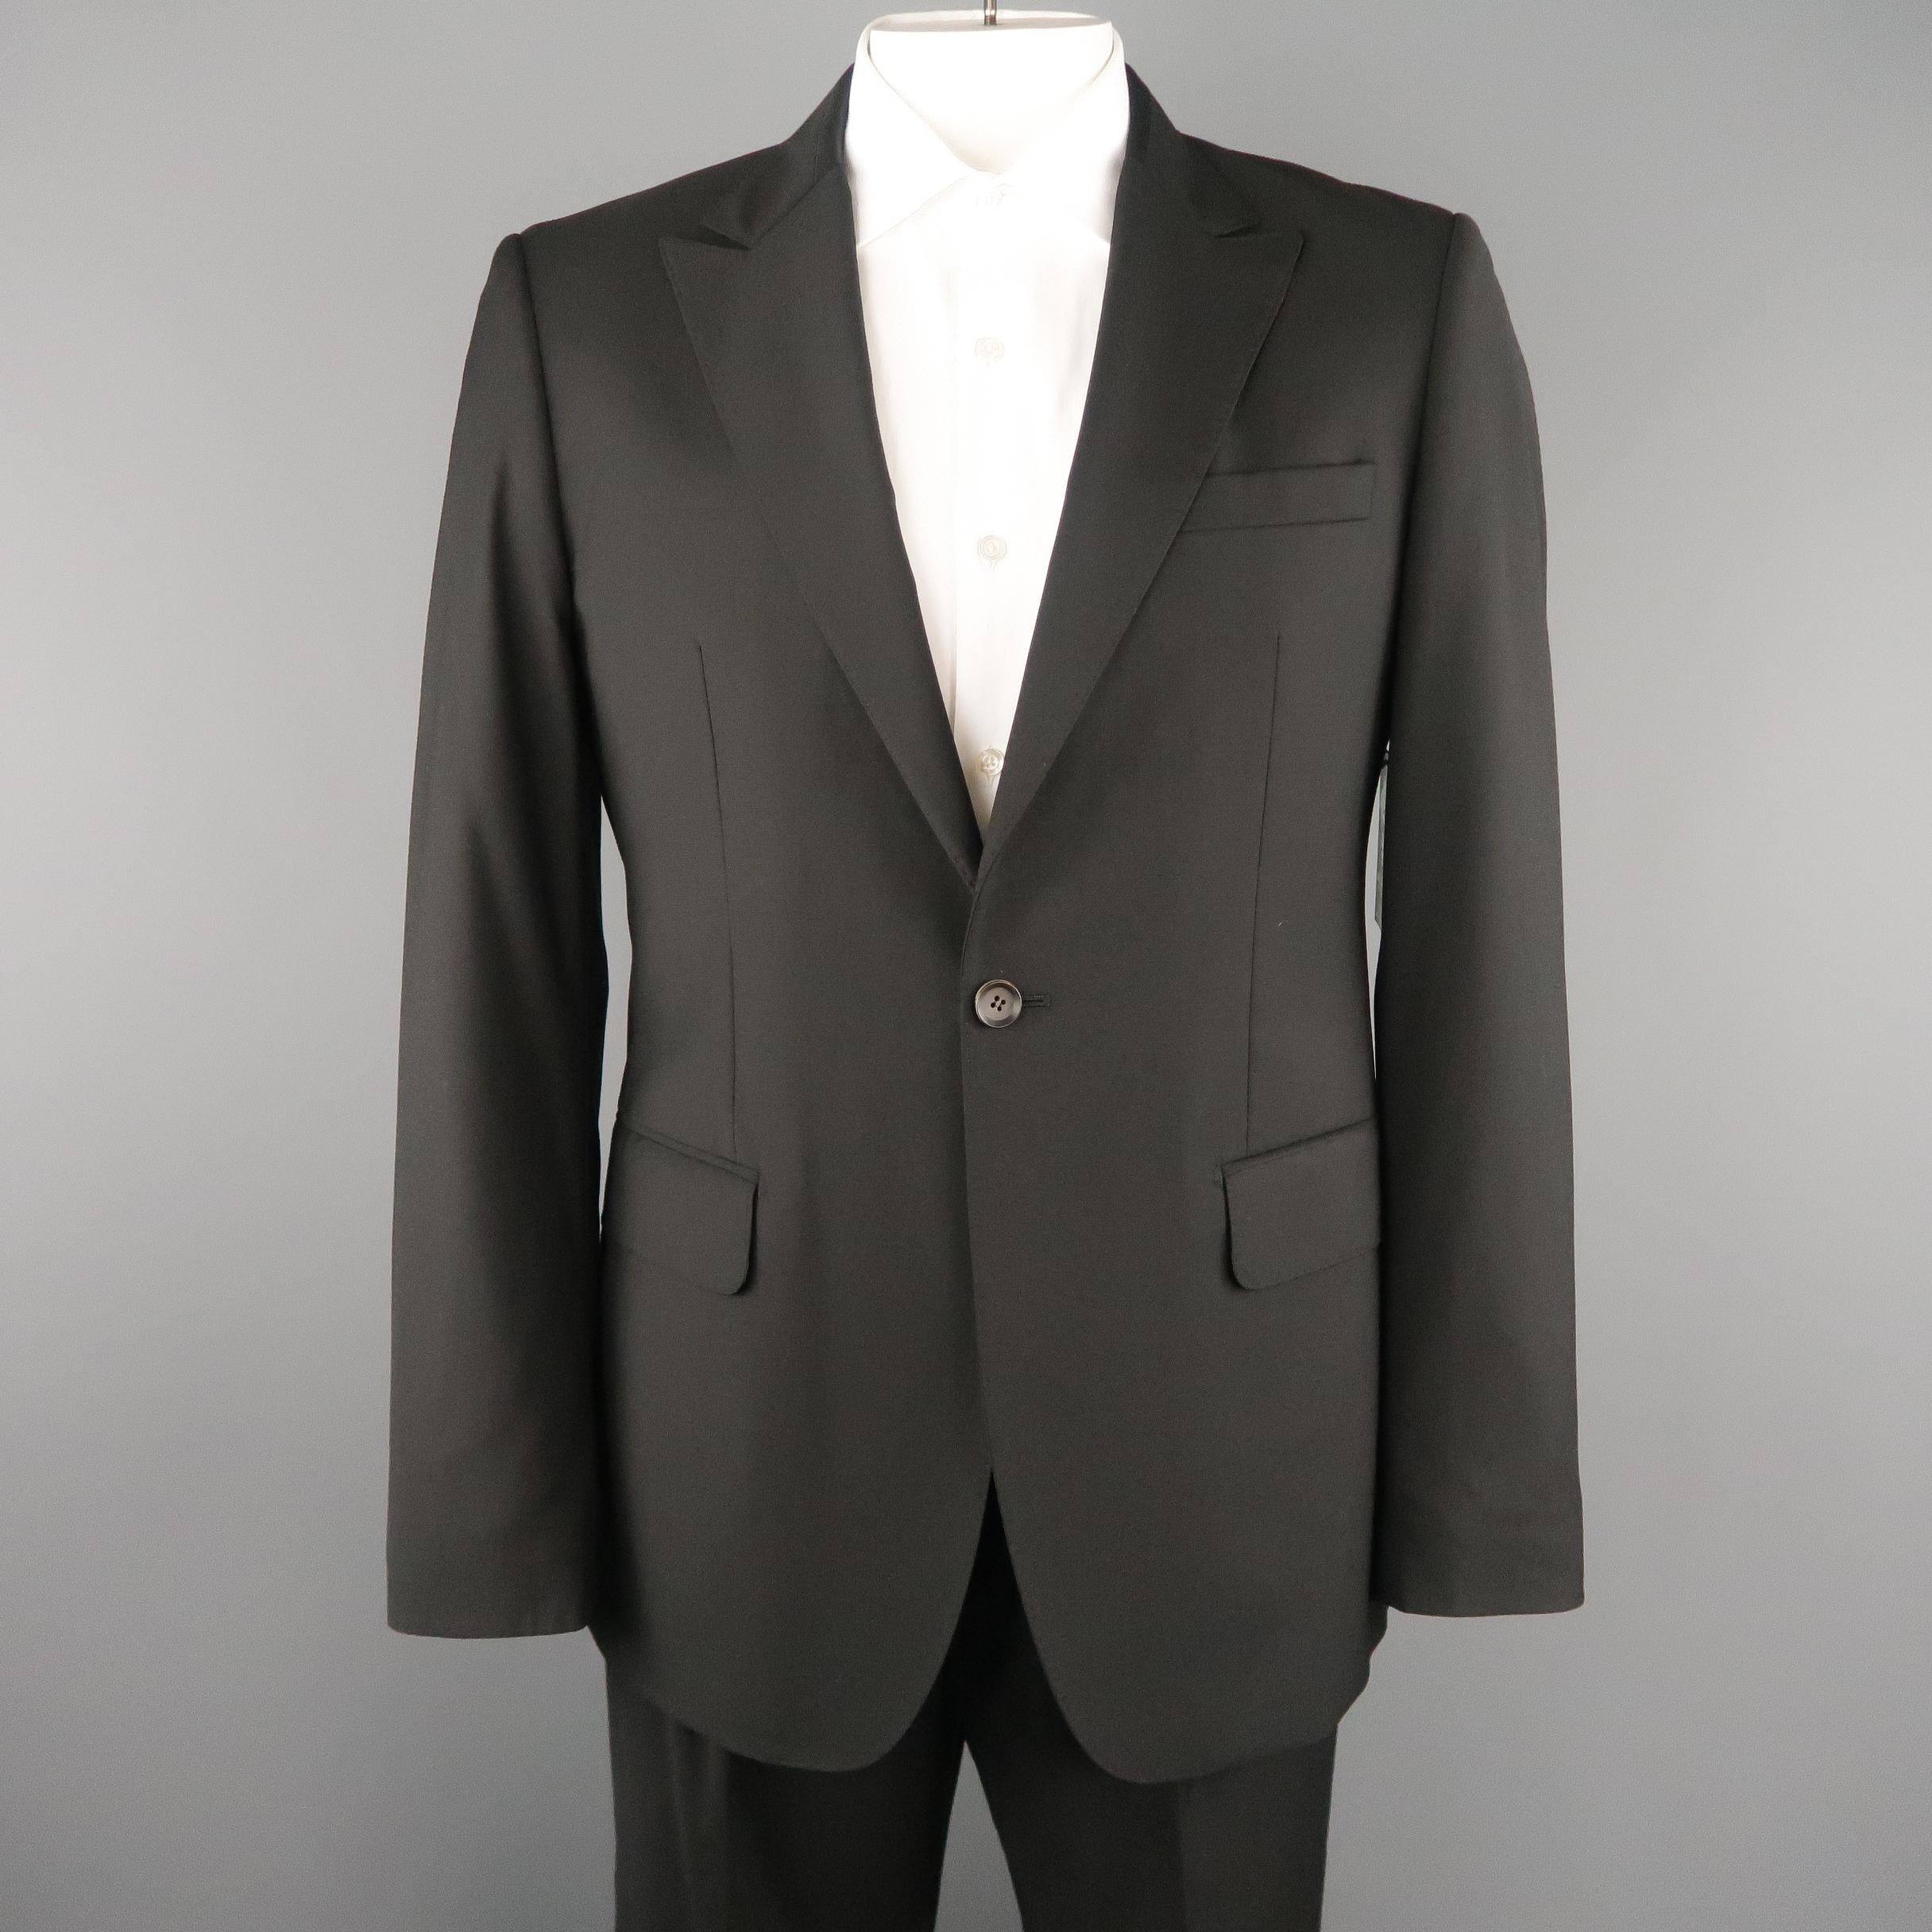 PACO ROBANNE suit includes a single breasted, one button, peak lapel sport coat with satin stripe collar detail with matching singe pleat trousers.
 
Excellent Pre-Owned Condition.
Marked: 105
 
Measurements:
 
-Jacket
Shoulder: 18 in.
Chest: 44